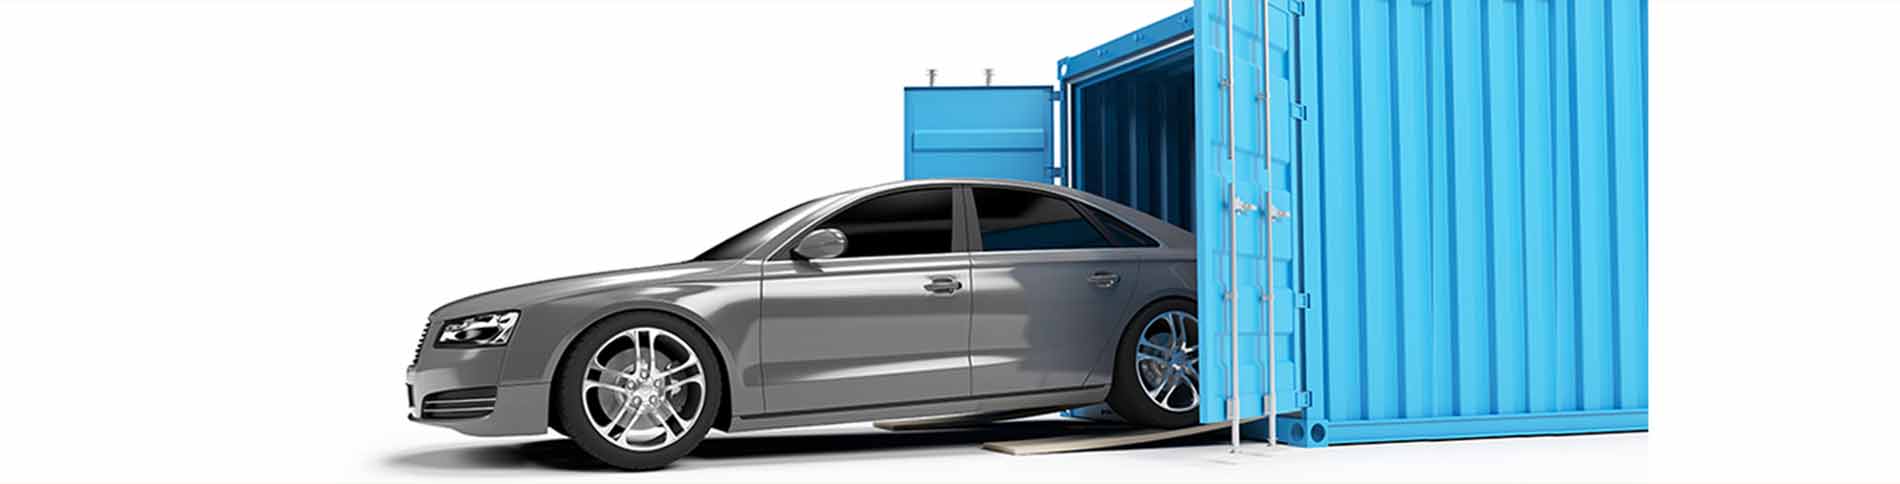 Car Storage Containers for Shipping & Parking | Conexwest